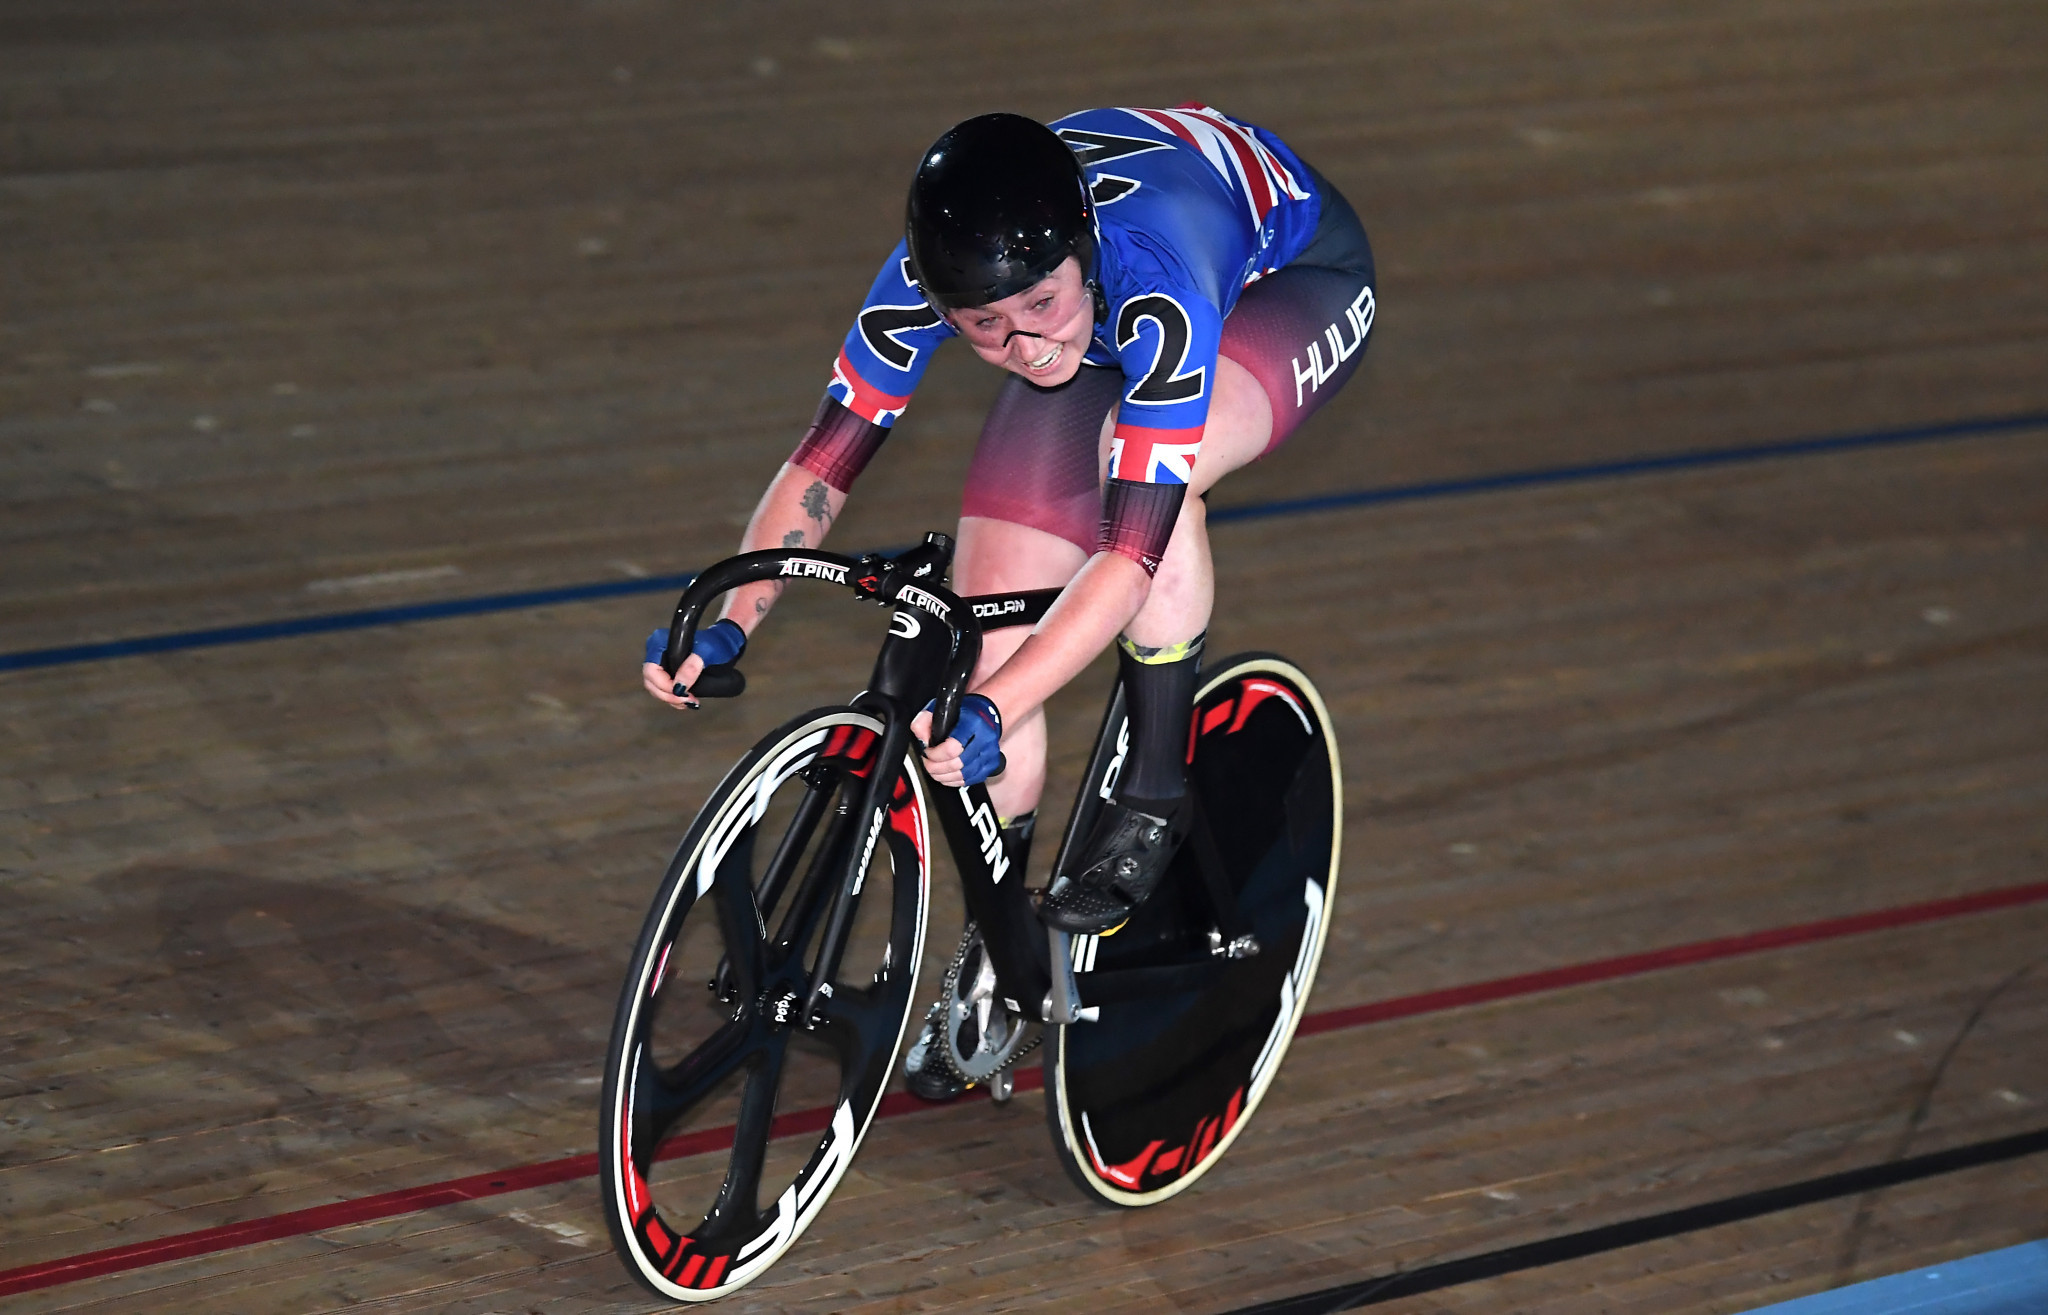 Glasgow set to inspire Great Britain at Track Cycling World Cup